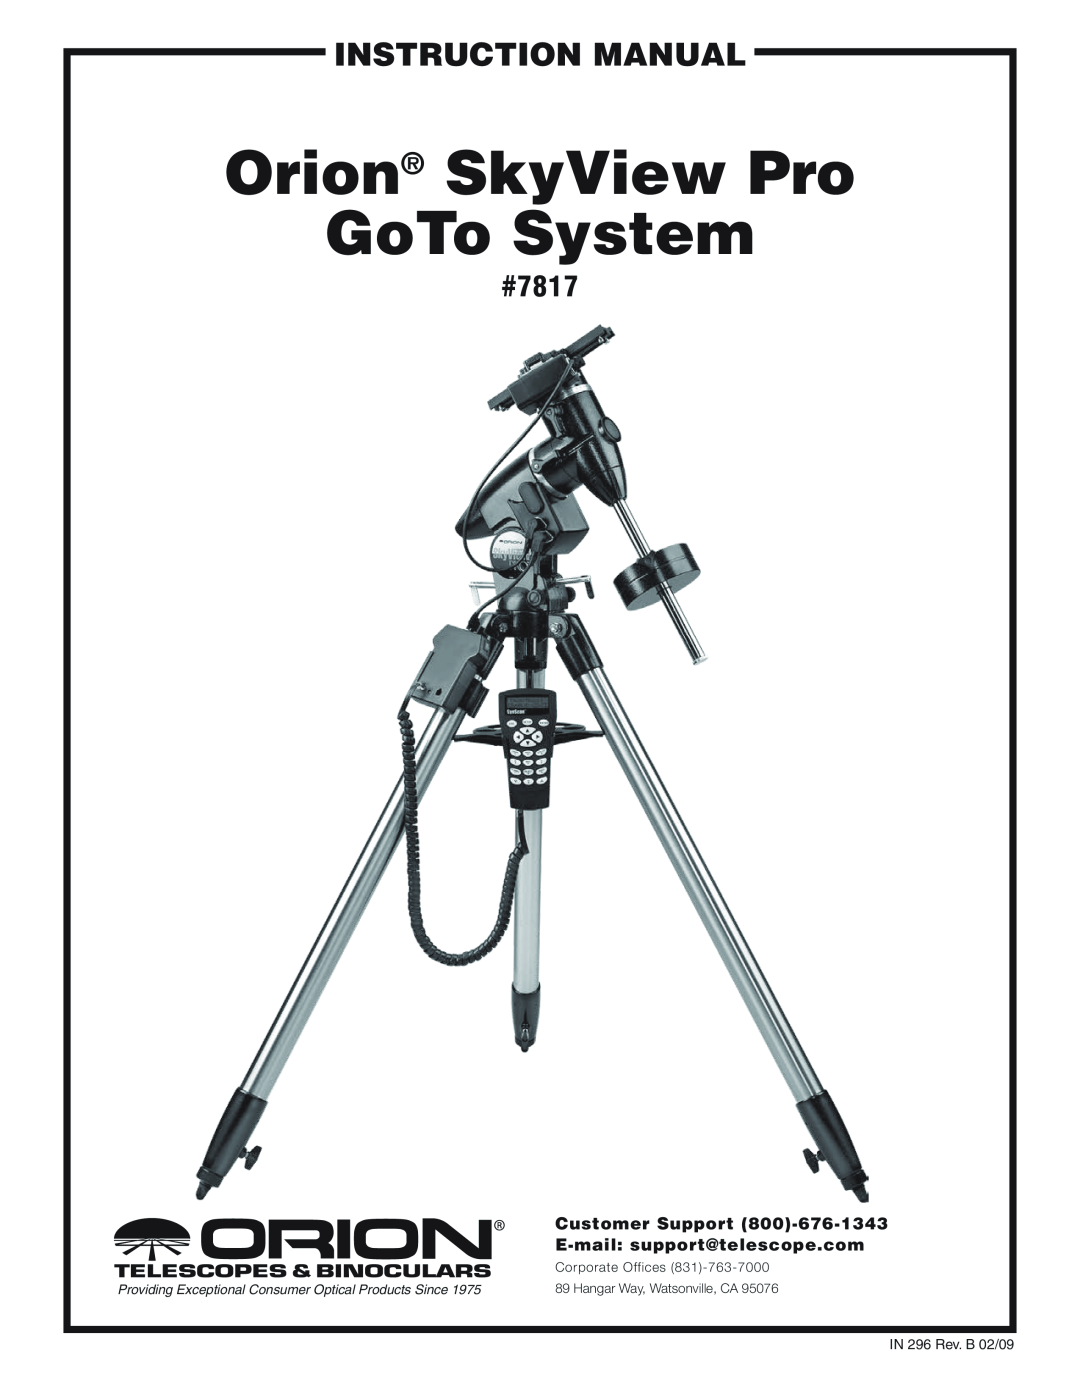 Orion instruction manual #7817, Customer Support 800‑676-1343, E-mail support@telescope.com, instruction Manual 